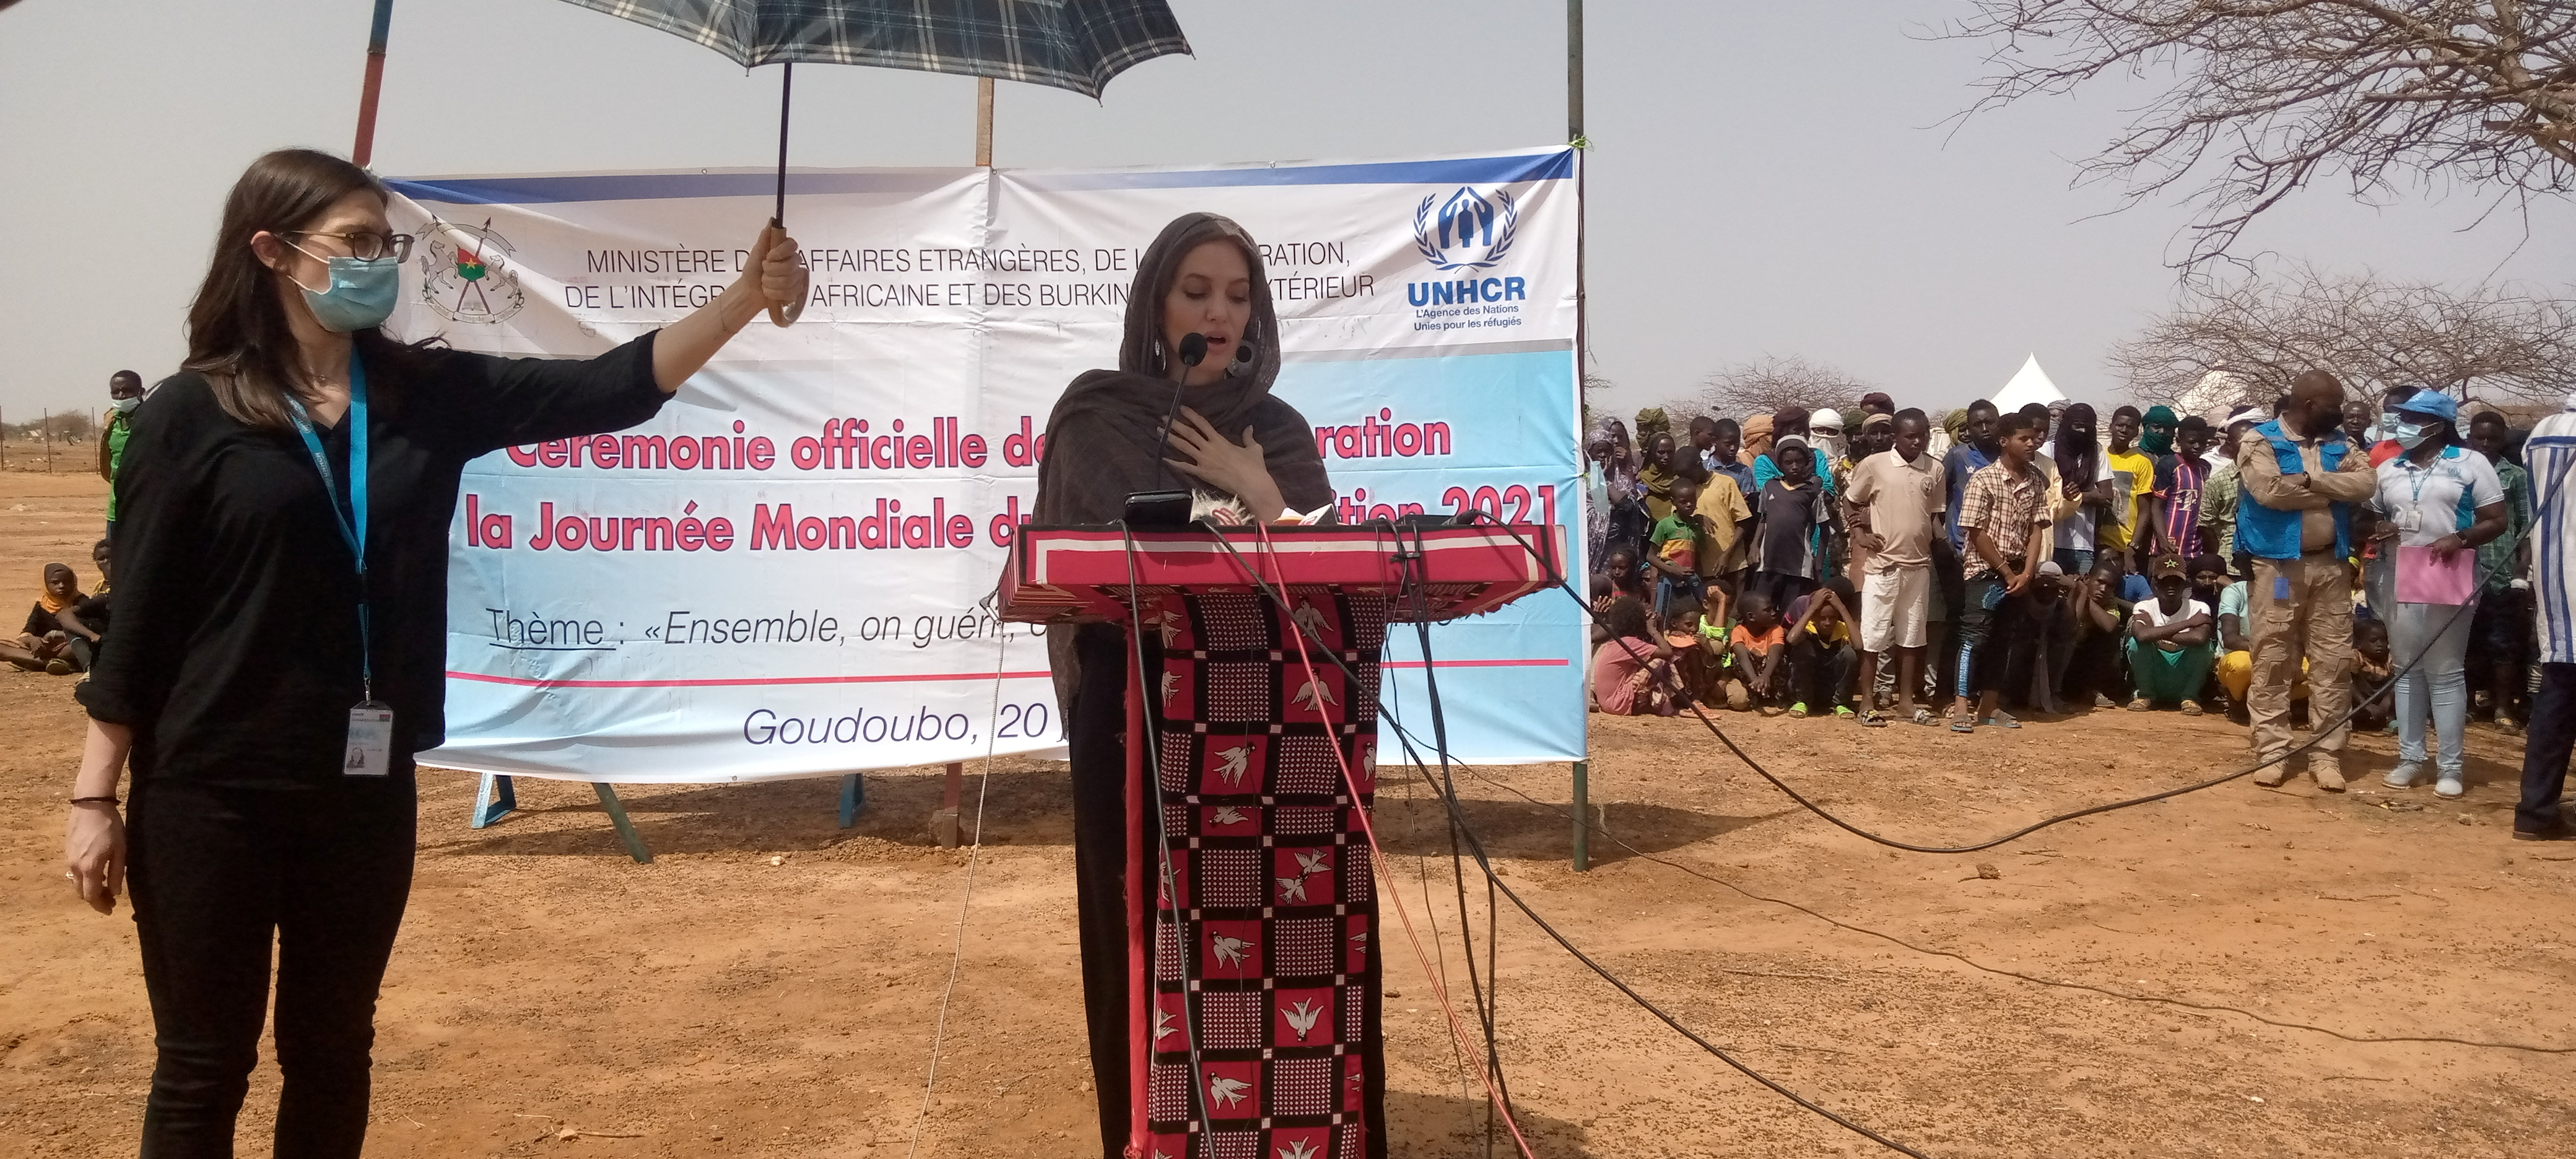 Actor Angelina Jolie, U.N. Refugee Agencys special envoy speaks during the World Refugee Day at the refugees camp in Goudoubou, Burkina Faso June 20, 2021. Picture taken June 20, 2021. REUTERS/Ndiaga Thiam NO RESALES. NO ARCHIVES